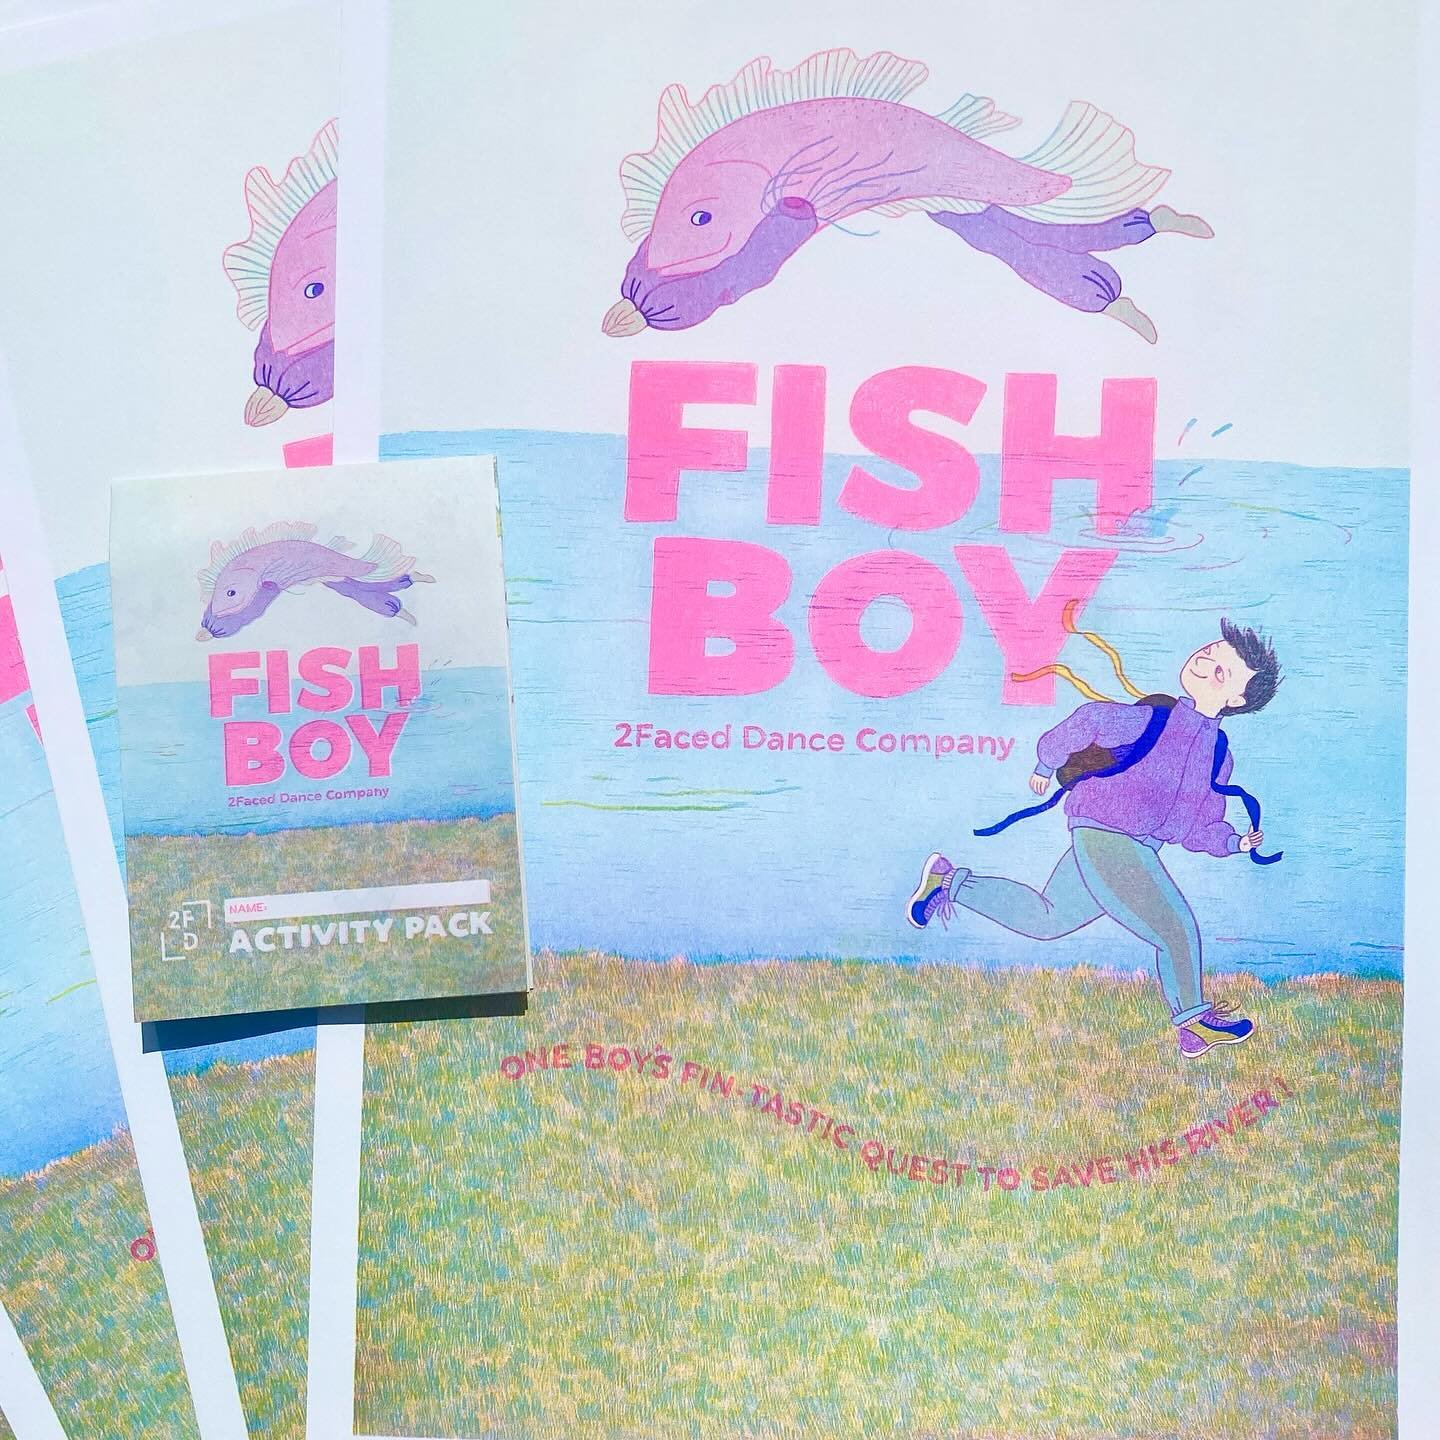 So many lovely details in these posters and activity packs for @2faceddance for their children&rsquo;s show, Fish Boy, which is now available for outdoor touring 🐟🐟 

Beautiful illustration by @noaparan ✨✨

𝘍𝘐𝘚𝘏 𝘉𝘖𝘠 𝘪𝘴 2𝘍𝘢𝘤𝘦𝘥 𝘋𝘢𝘯𝘤